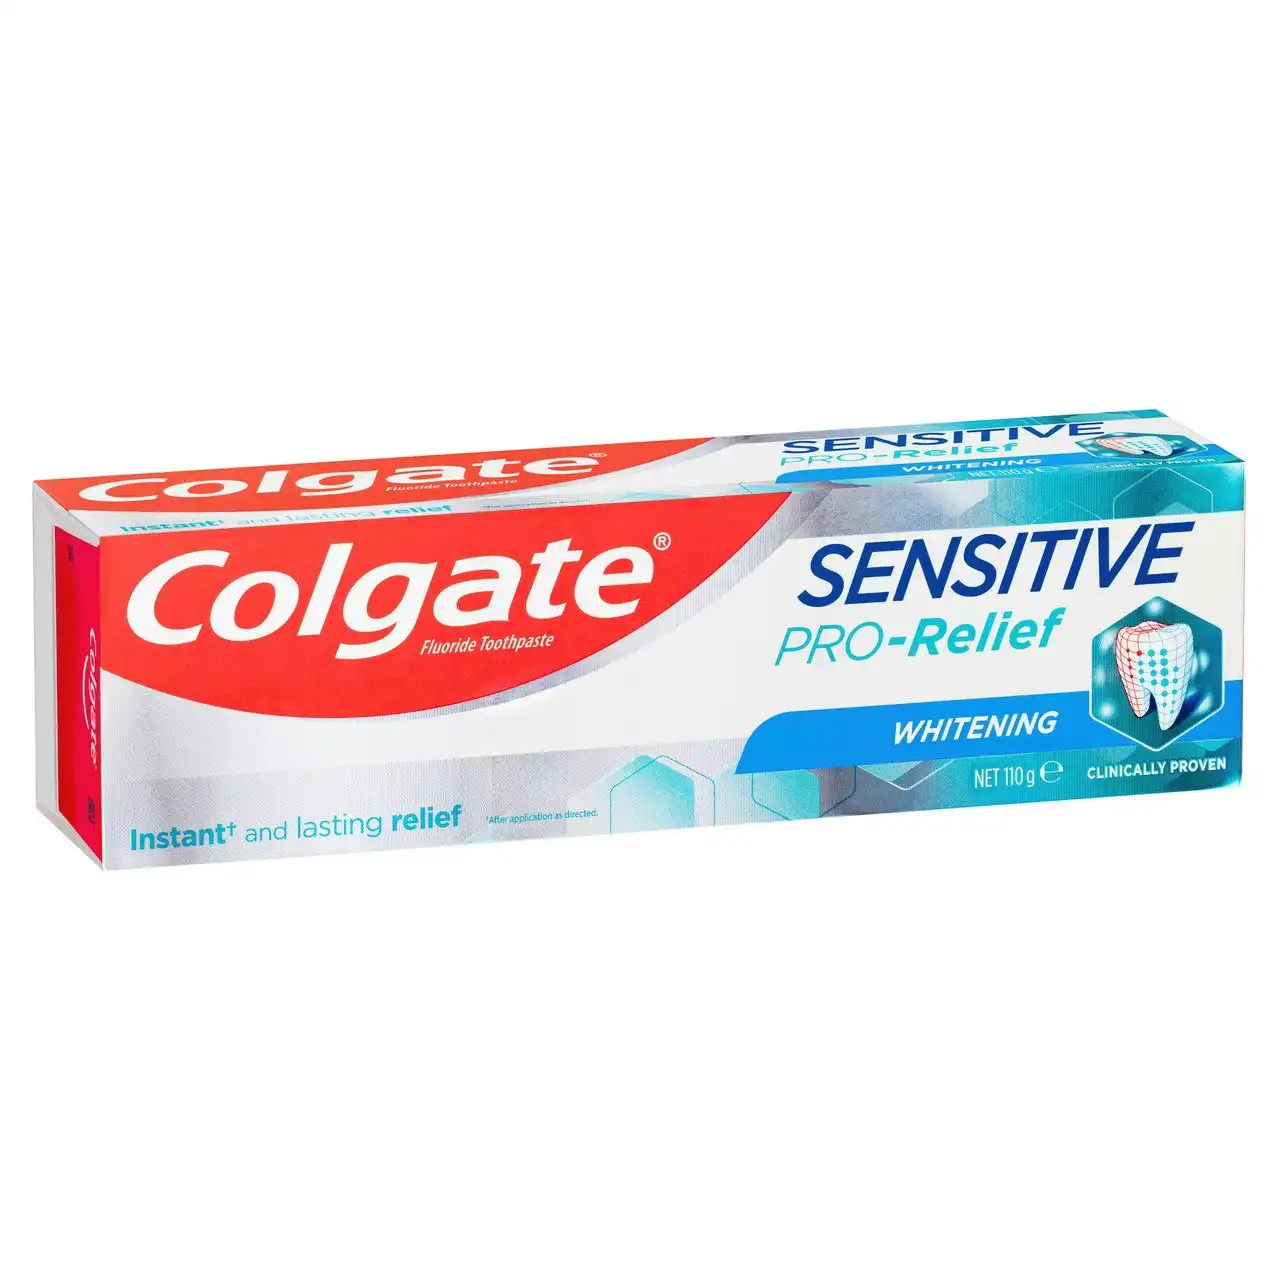 Colgate Sensitive Pro-Relief Whitening Toothpaste, 110g, Clinically Proven Sensitive Teeth Pain Relief